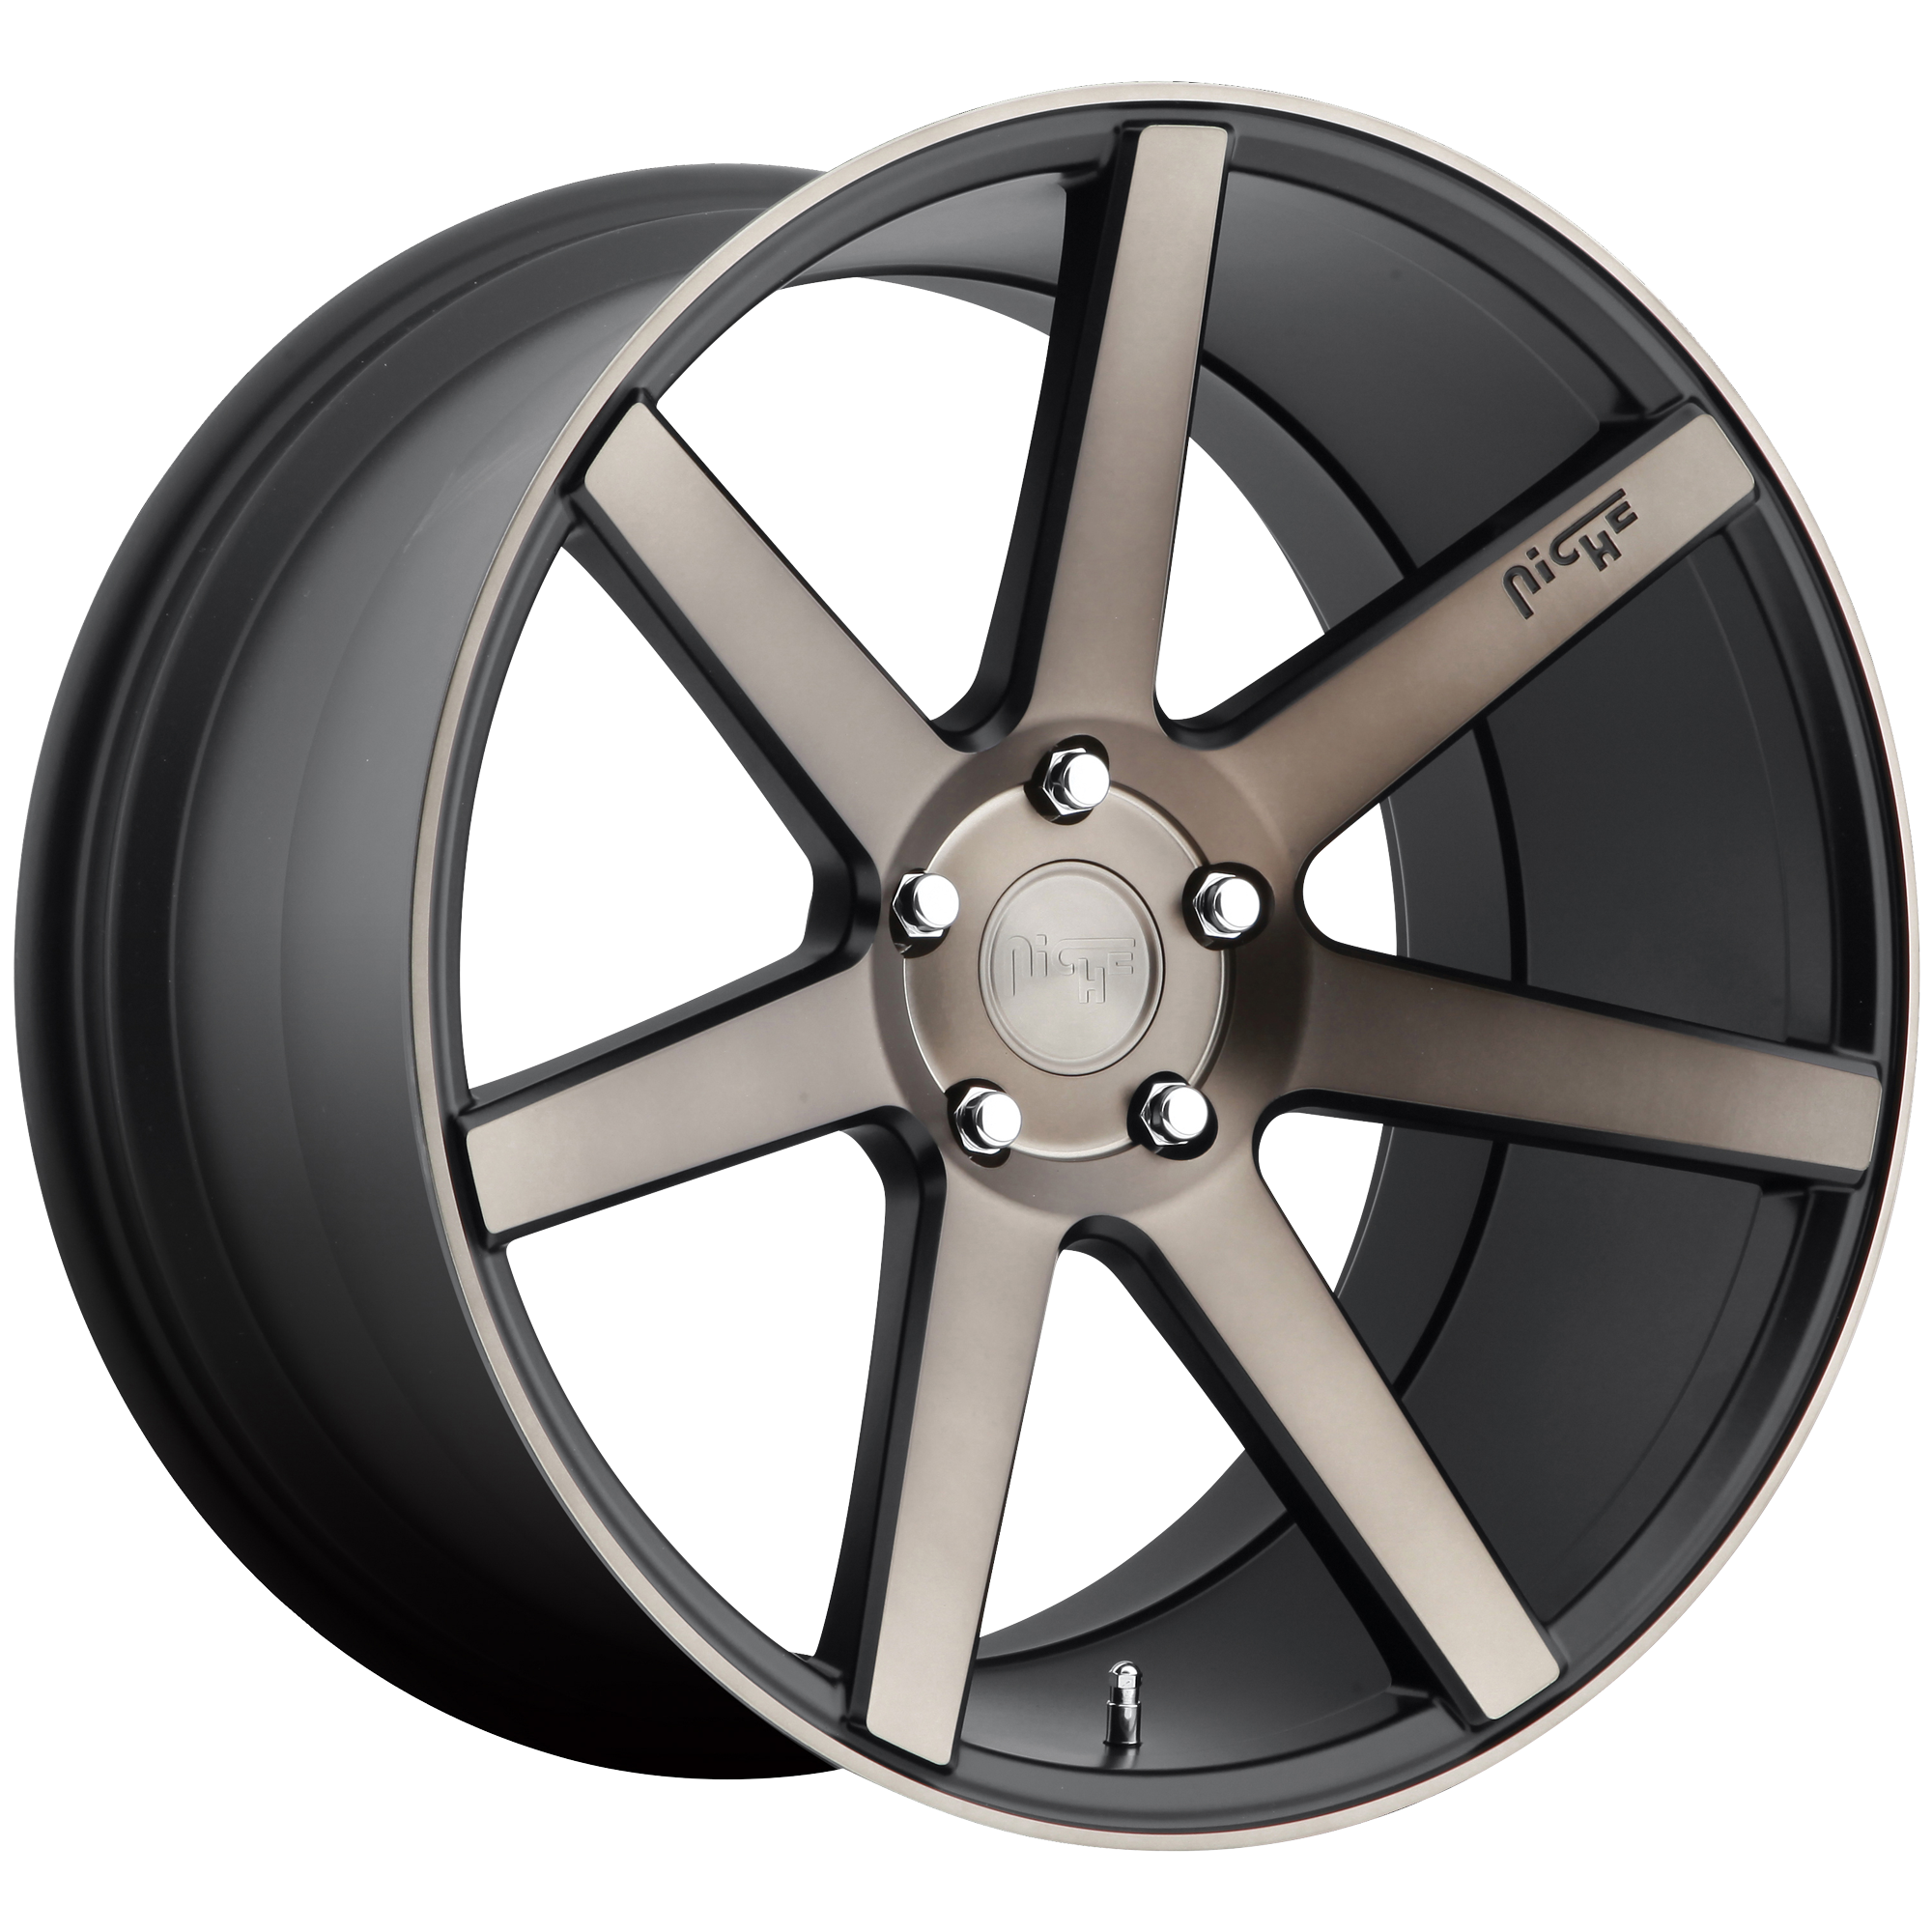 VERONA 18x8 5x112.00 MATTE BLACK MACHINED (42 mm) - Tires and Engine Performance